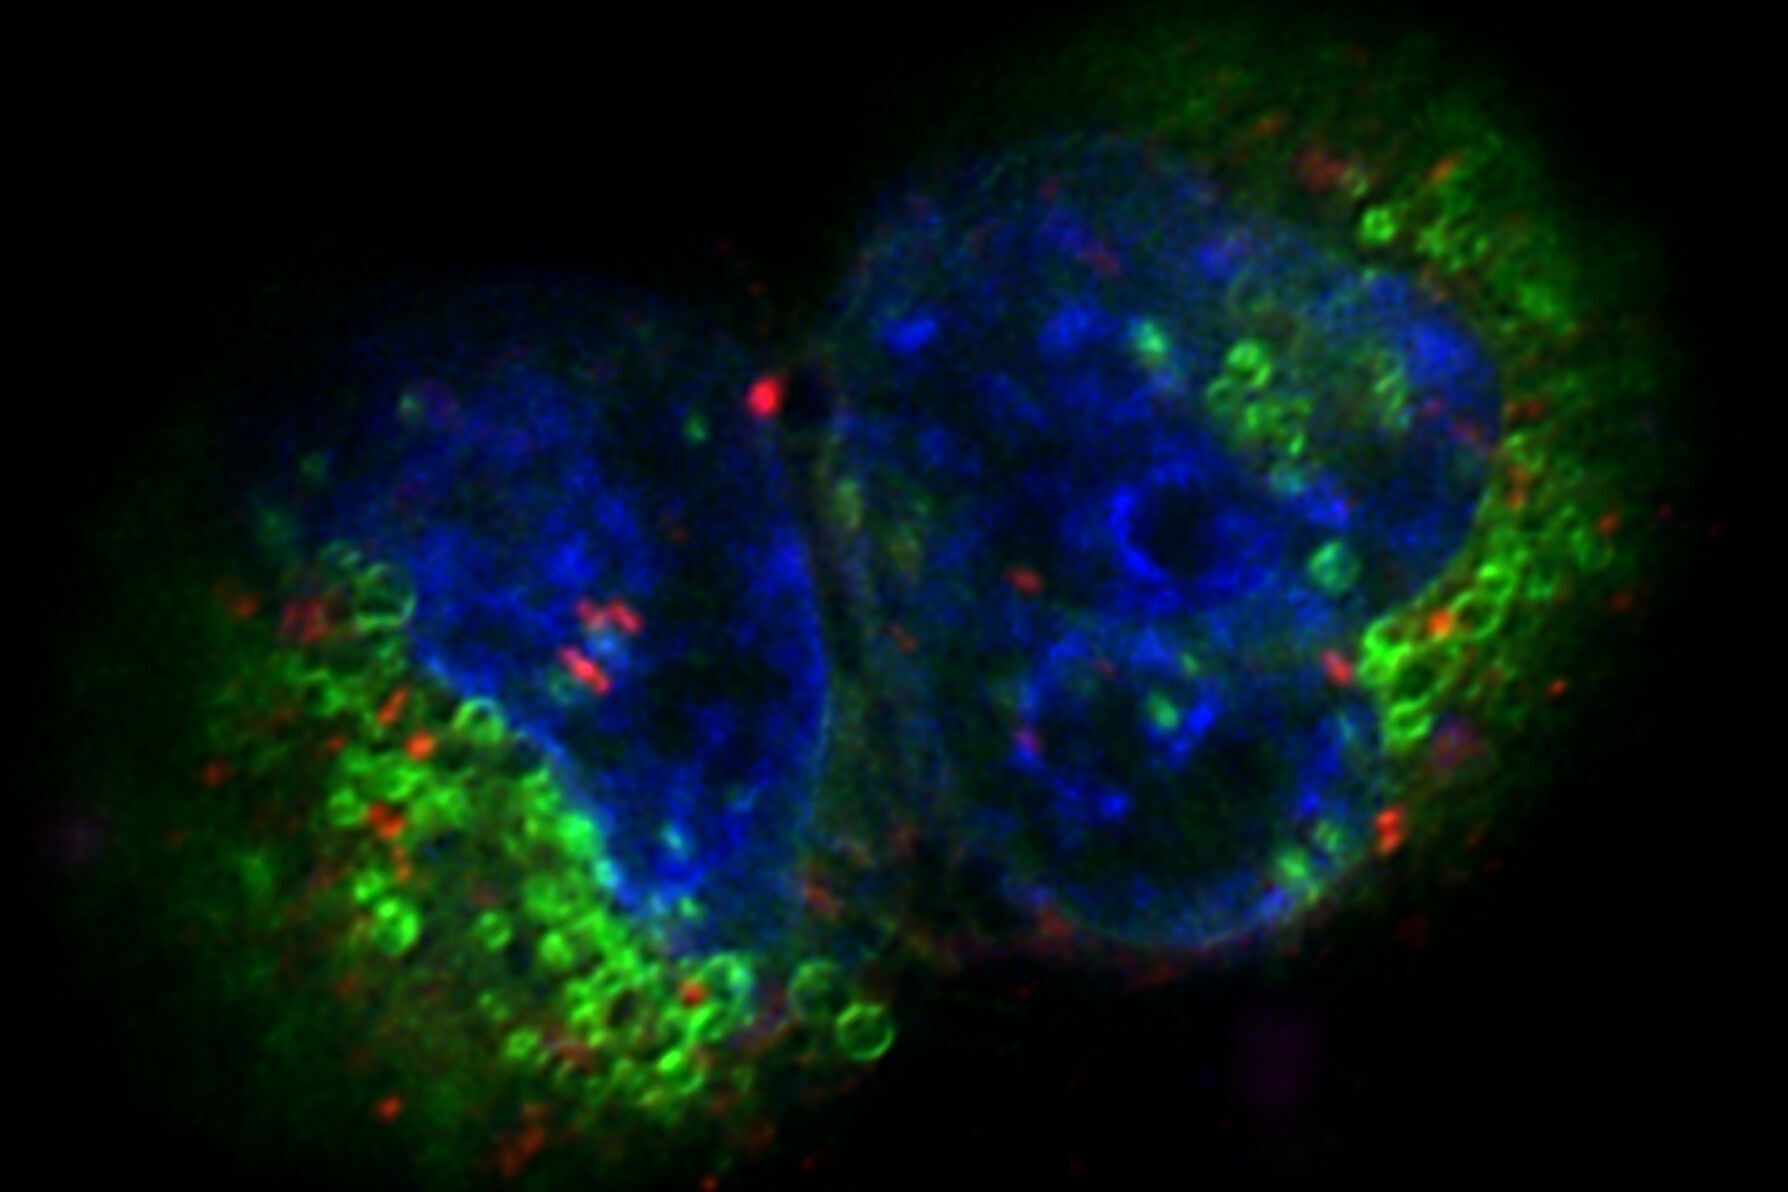 Projection of a confocal z-stack. Sum159 cells, human breast cancer cells kindly provided by Ievgeniia Zagoriy, Mahamid Group, EMBL Heidelberg, Germany. Blue–Hoechst - indicates nuclei, Green–MitoTracker Green–mitochondria, and red–Bodipy - lipid droplets